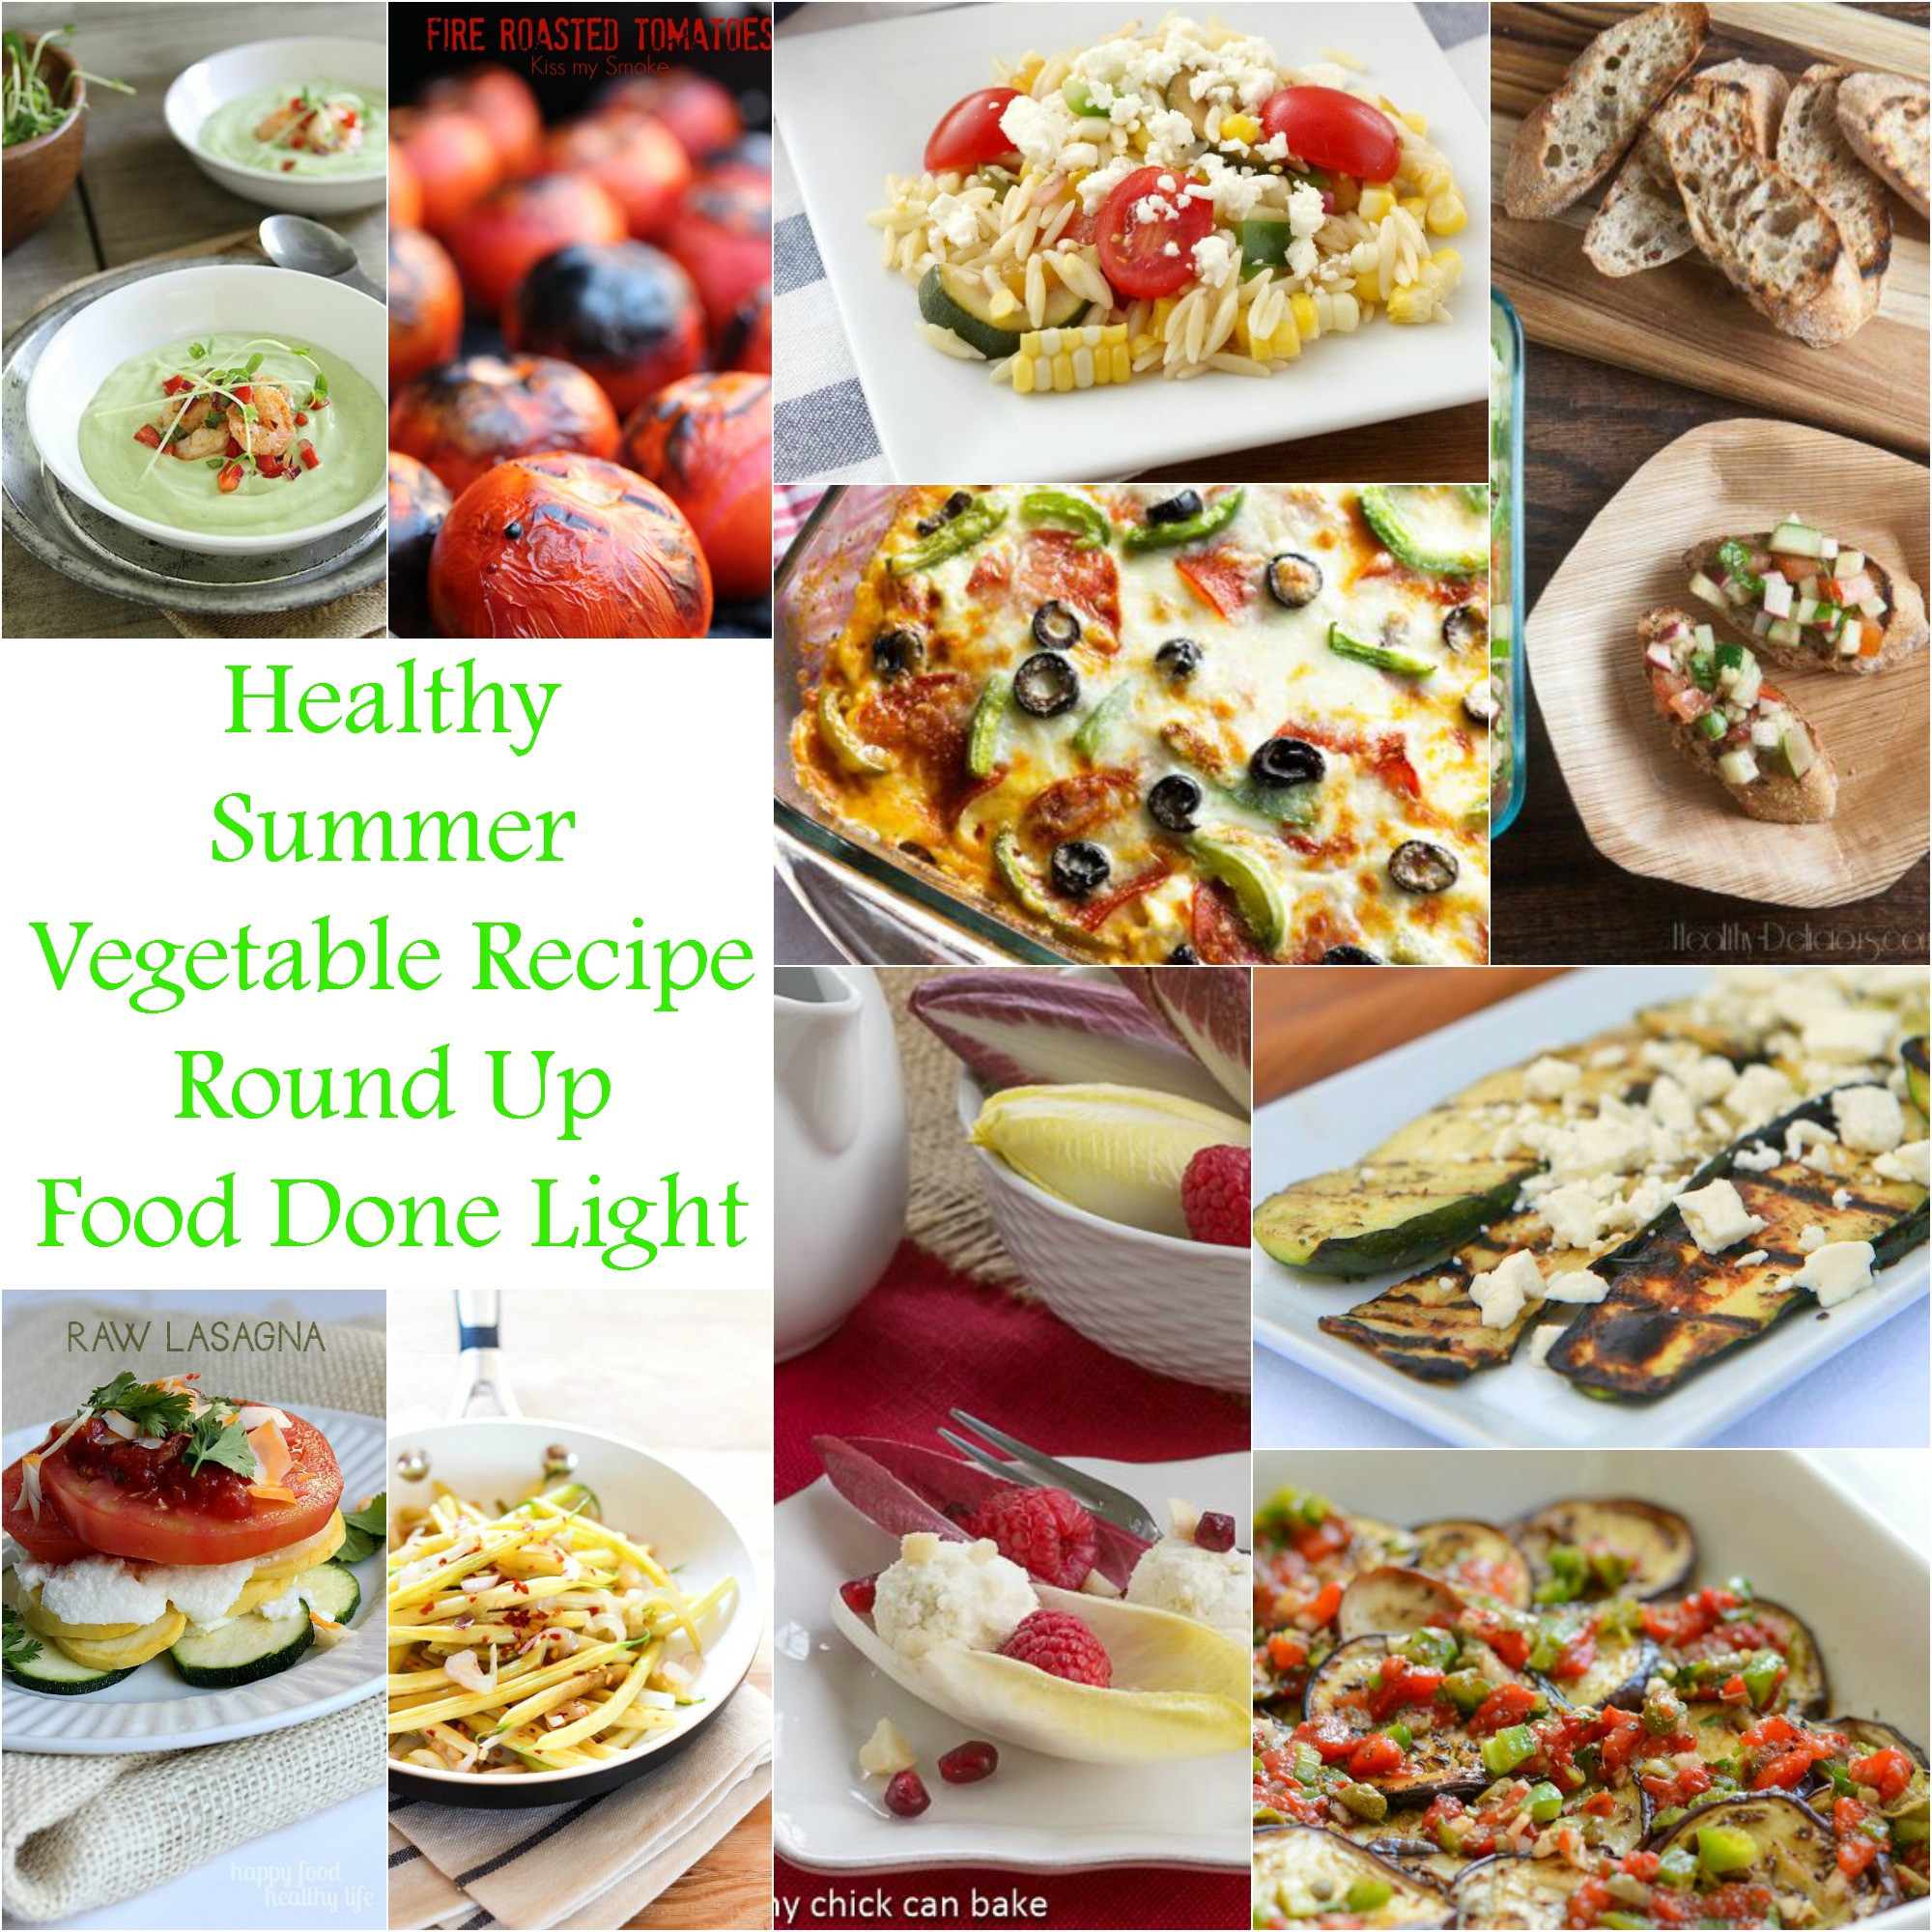 Healthy Summer Vegetarian Recipes
 Healthy Summer Ve able Recipe Round Up Food Done Light